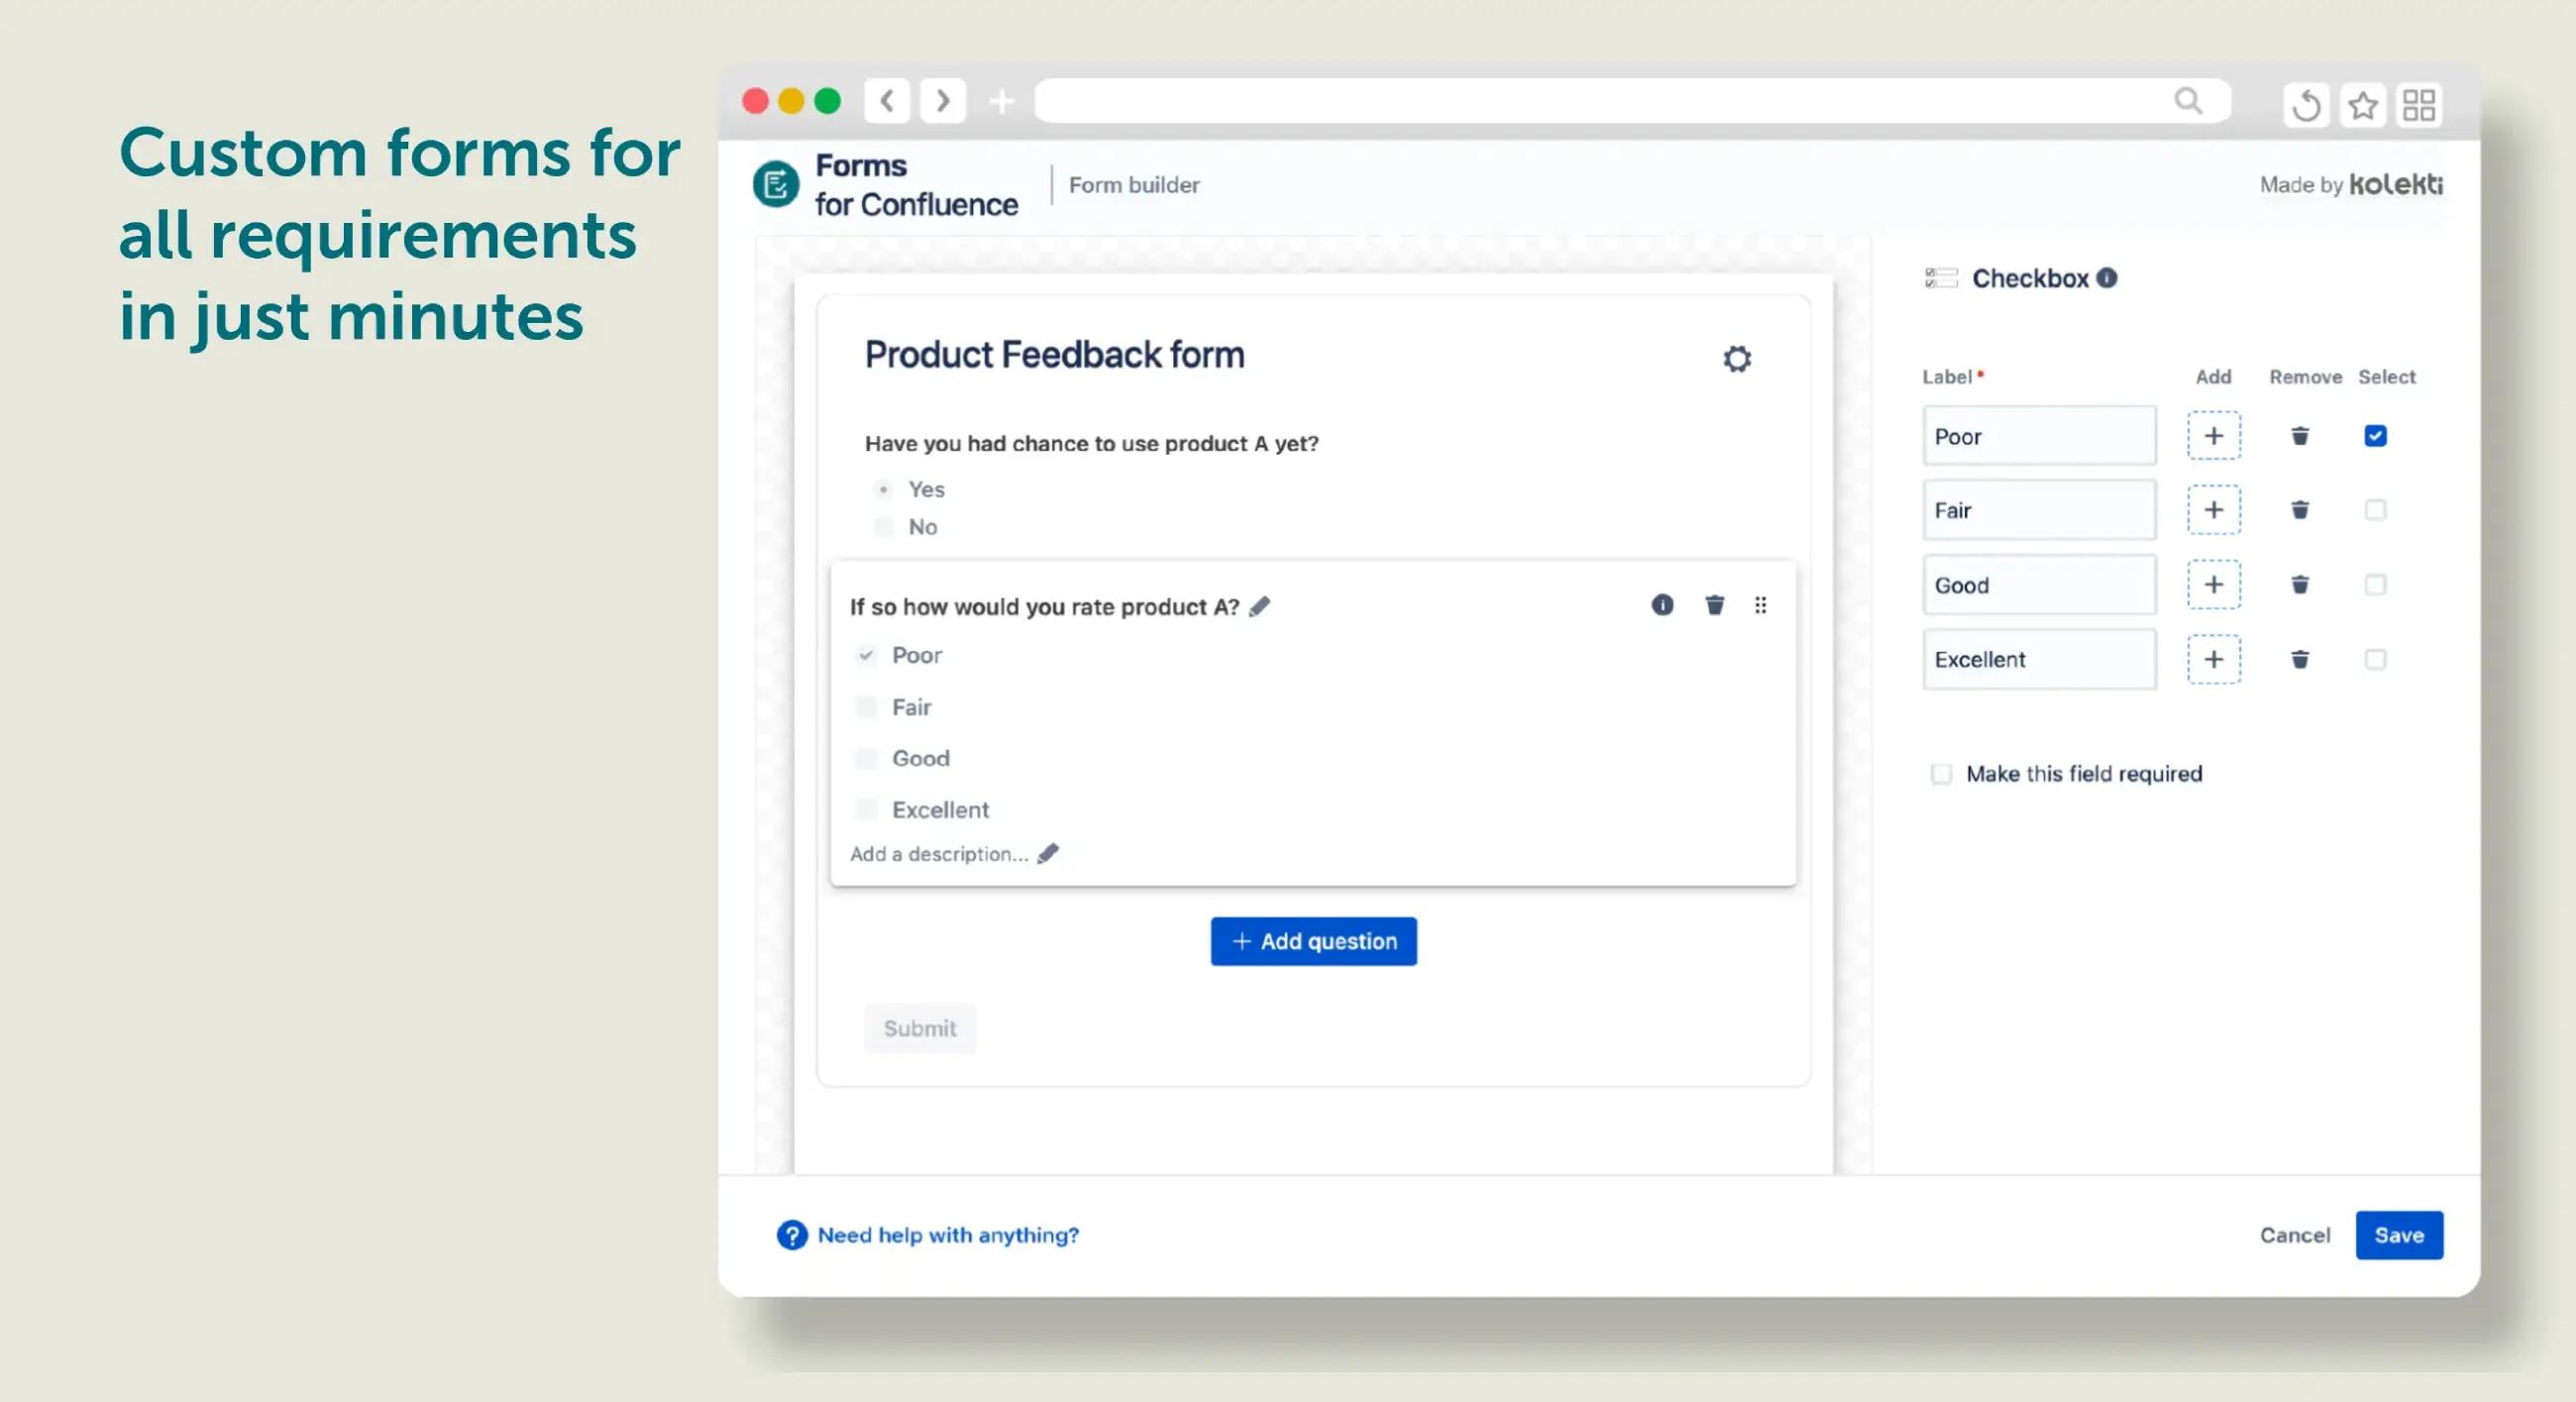 The Forms for Confluence form builder with caption that says 'Custom forms for all requirements in just minutes'